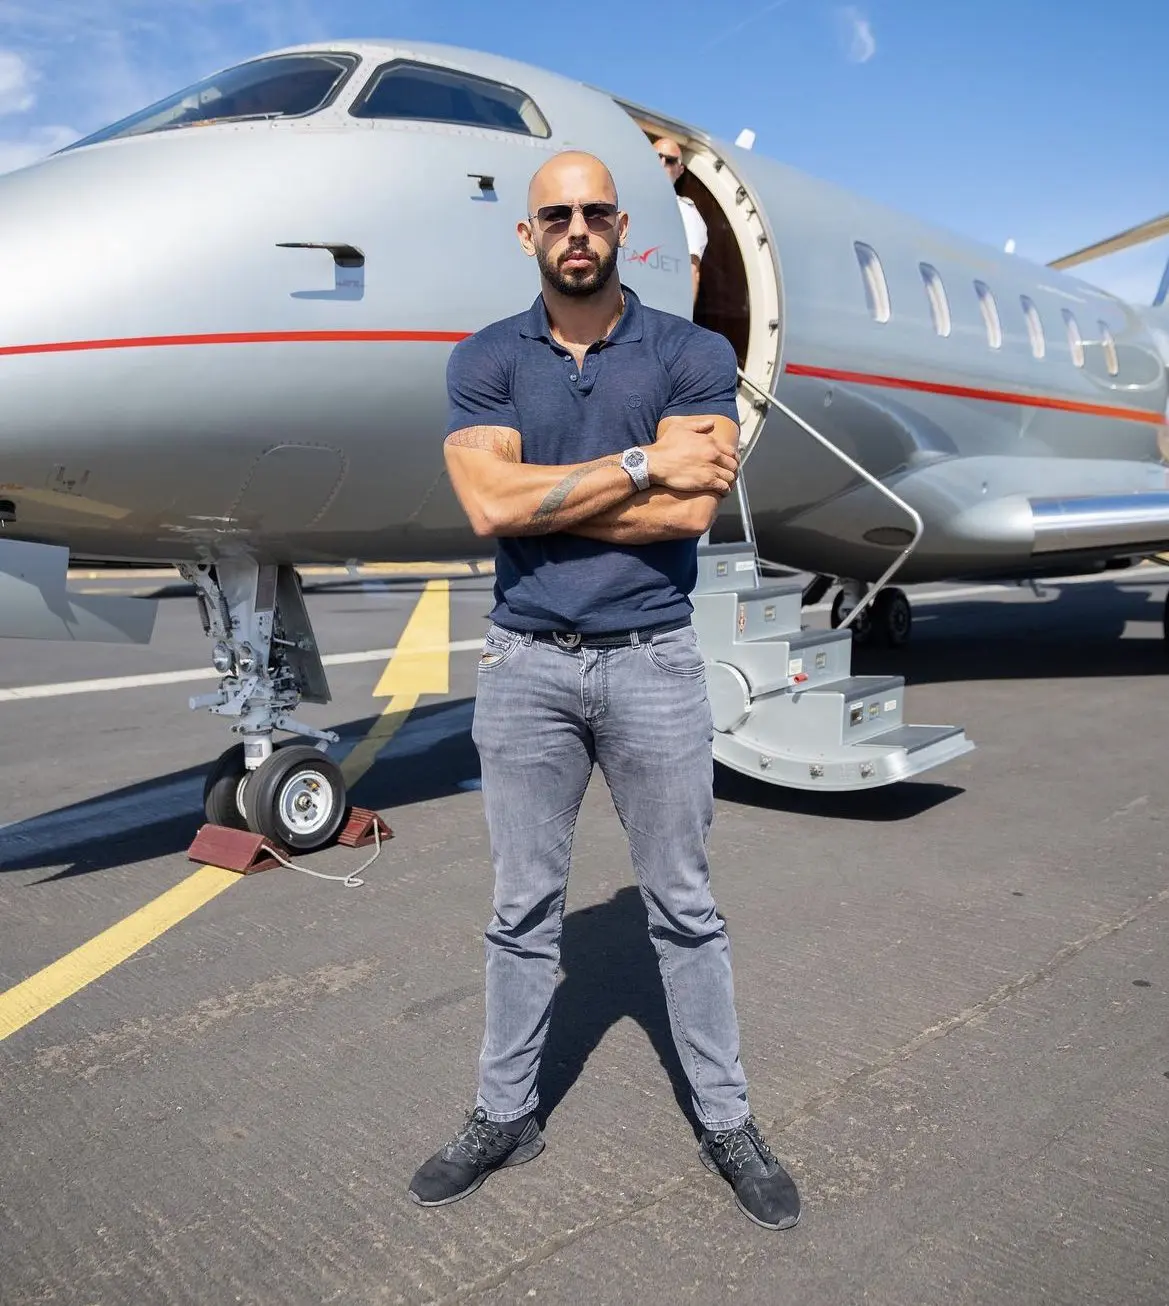 Andrew Tate standing in front of a private jet